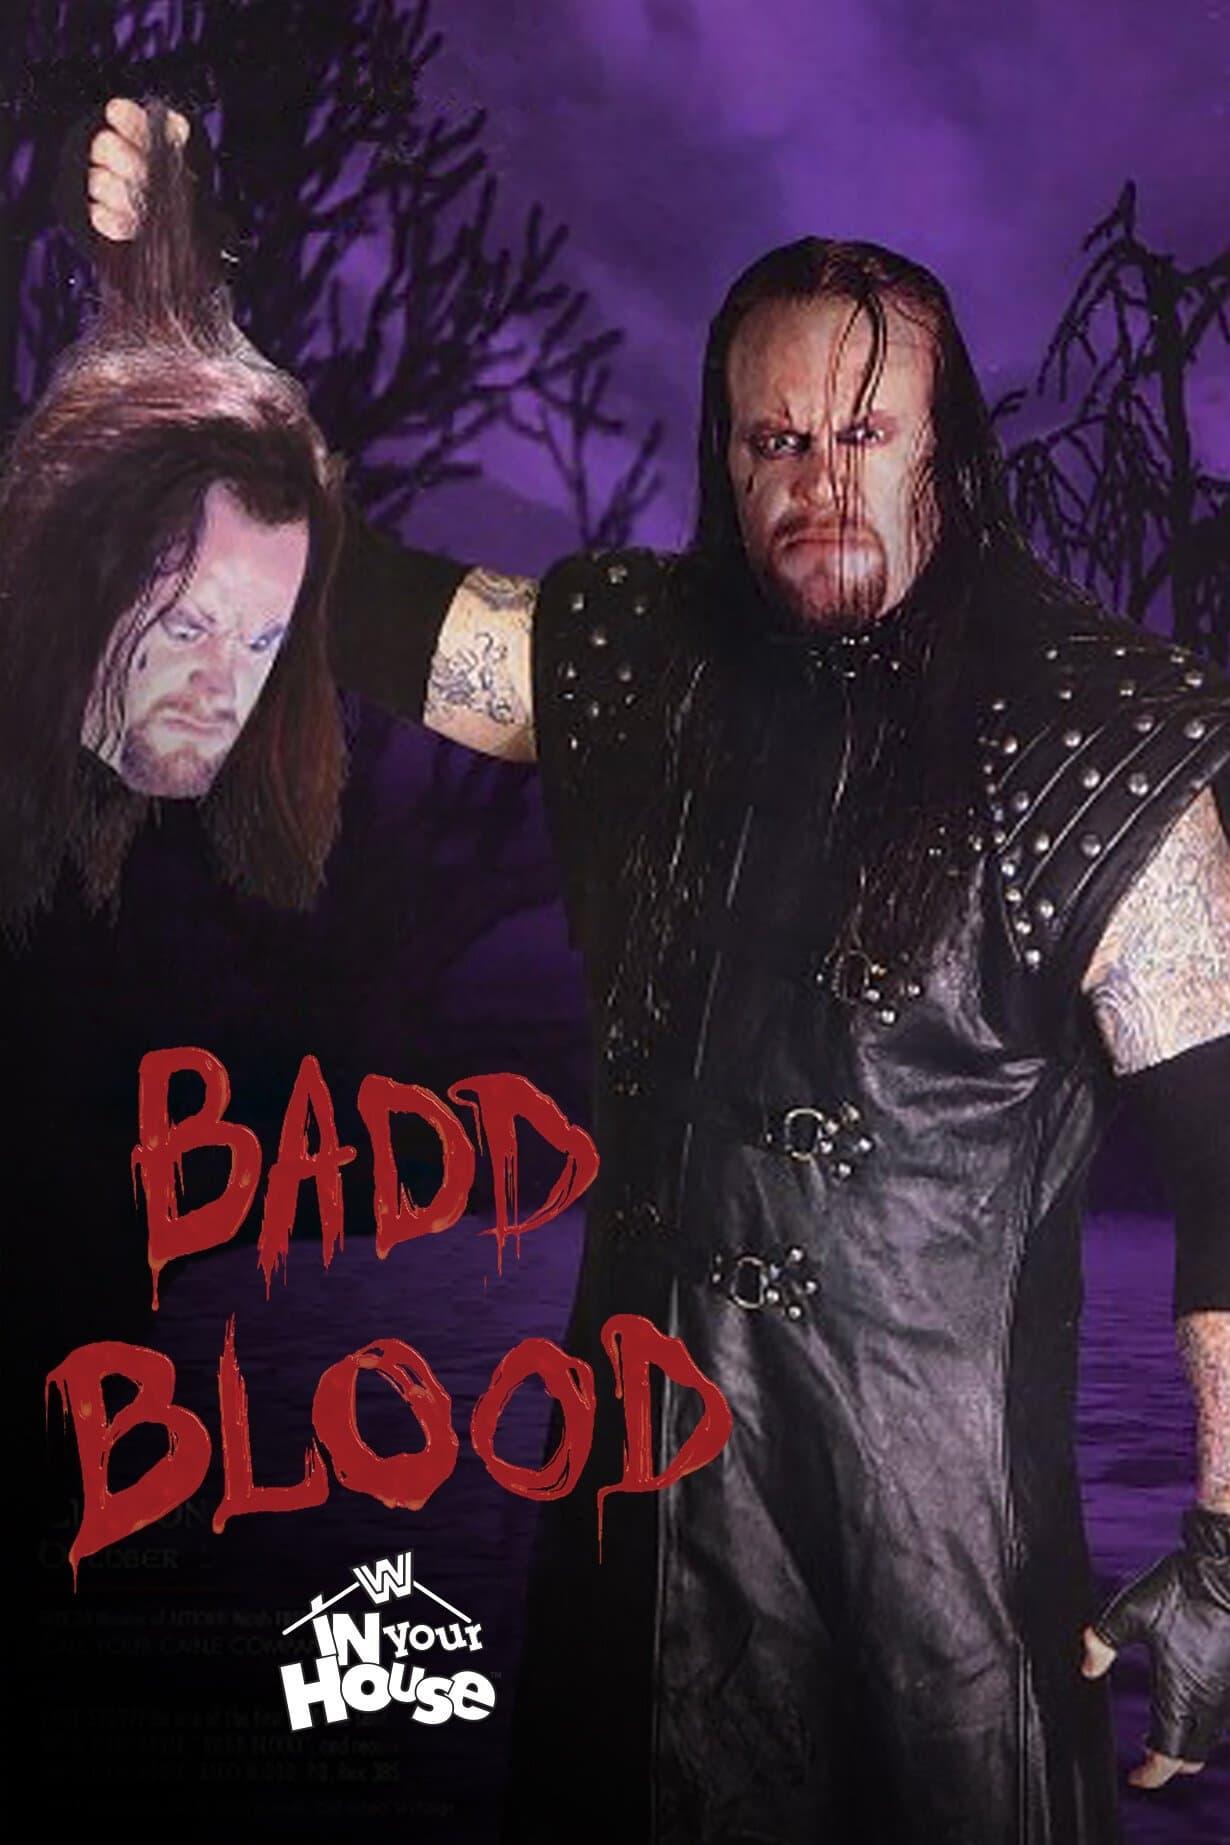 WWE Badd Blood: In Your House poster